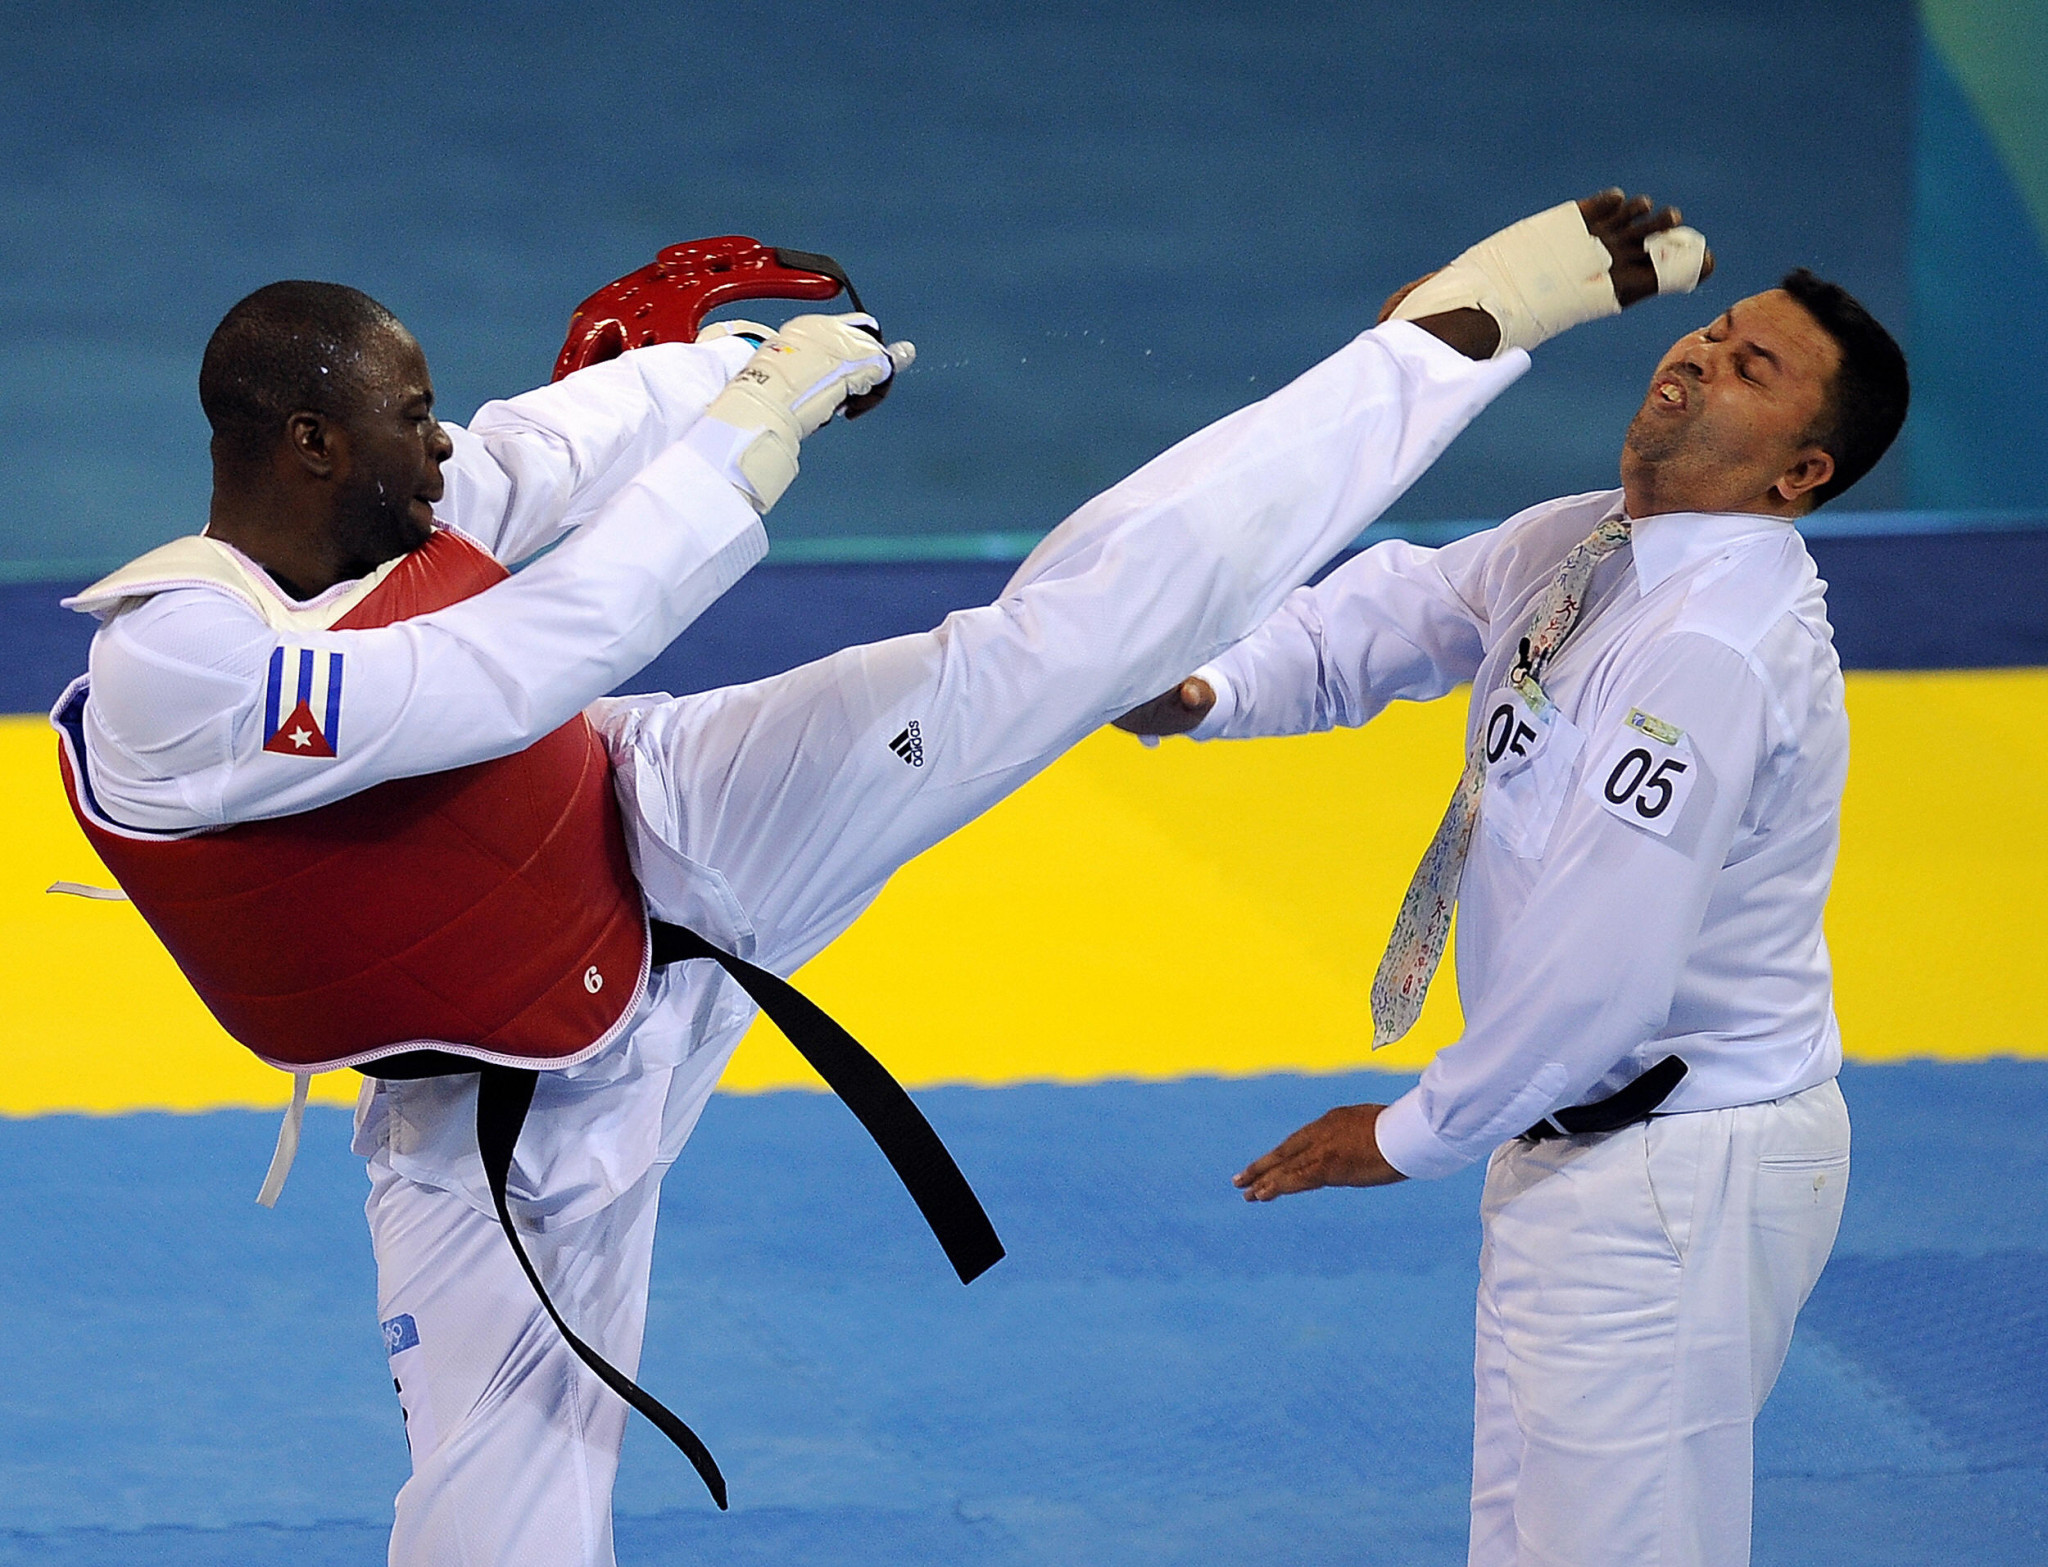 Chakir Chelbat was kicked in the face by Cuba's Ángel Matos at the Beijing 2008 Olympics ©Getty Images